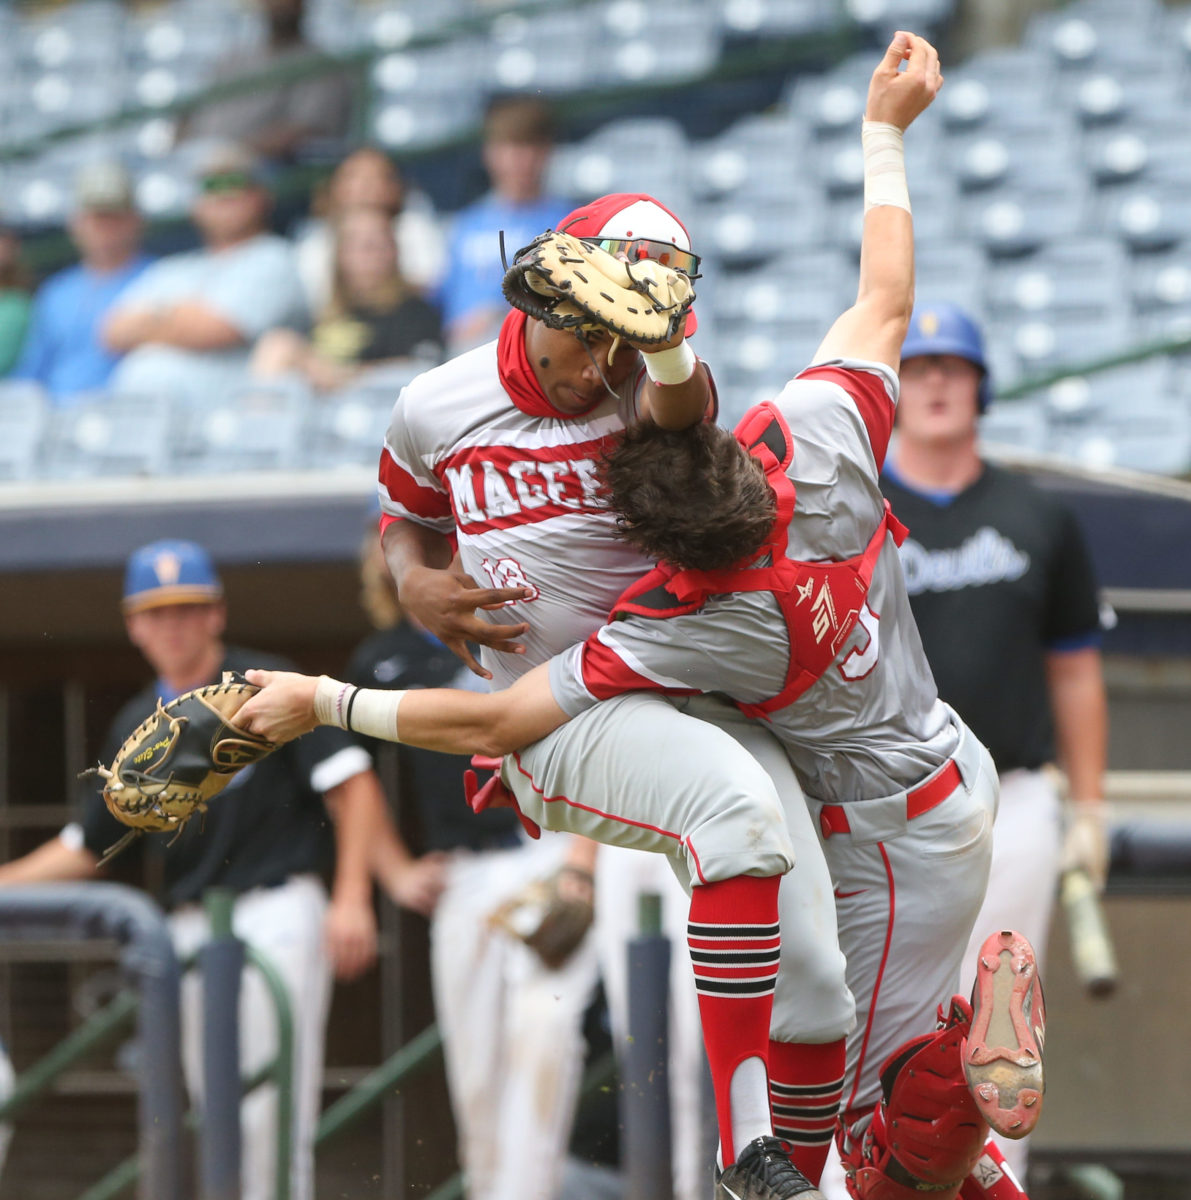 Magee's Chance Magee (18) and Magee's Banks Teater (3) collide while trying to catch a foul ball. Booneville and Magee played in game 3 of the MHSAA Class 3A Baseball Championship on Saturday, June 5, 2021 at Trustmark Park. Photo by Keith Warren